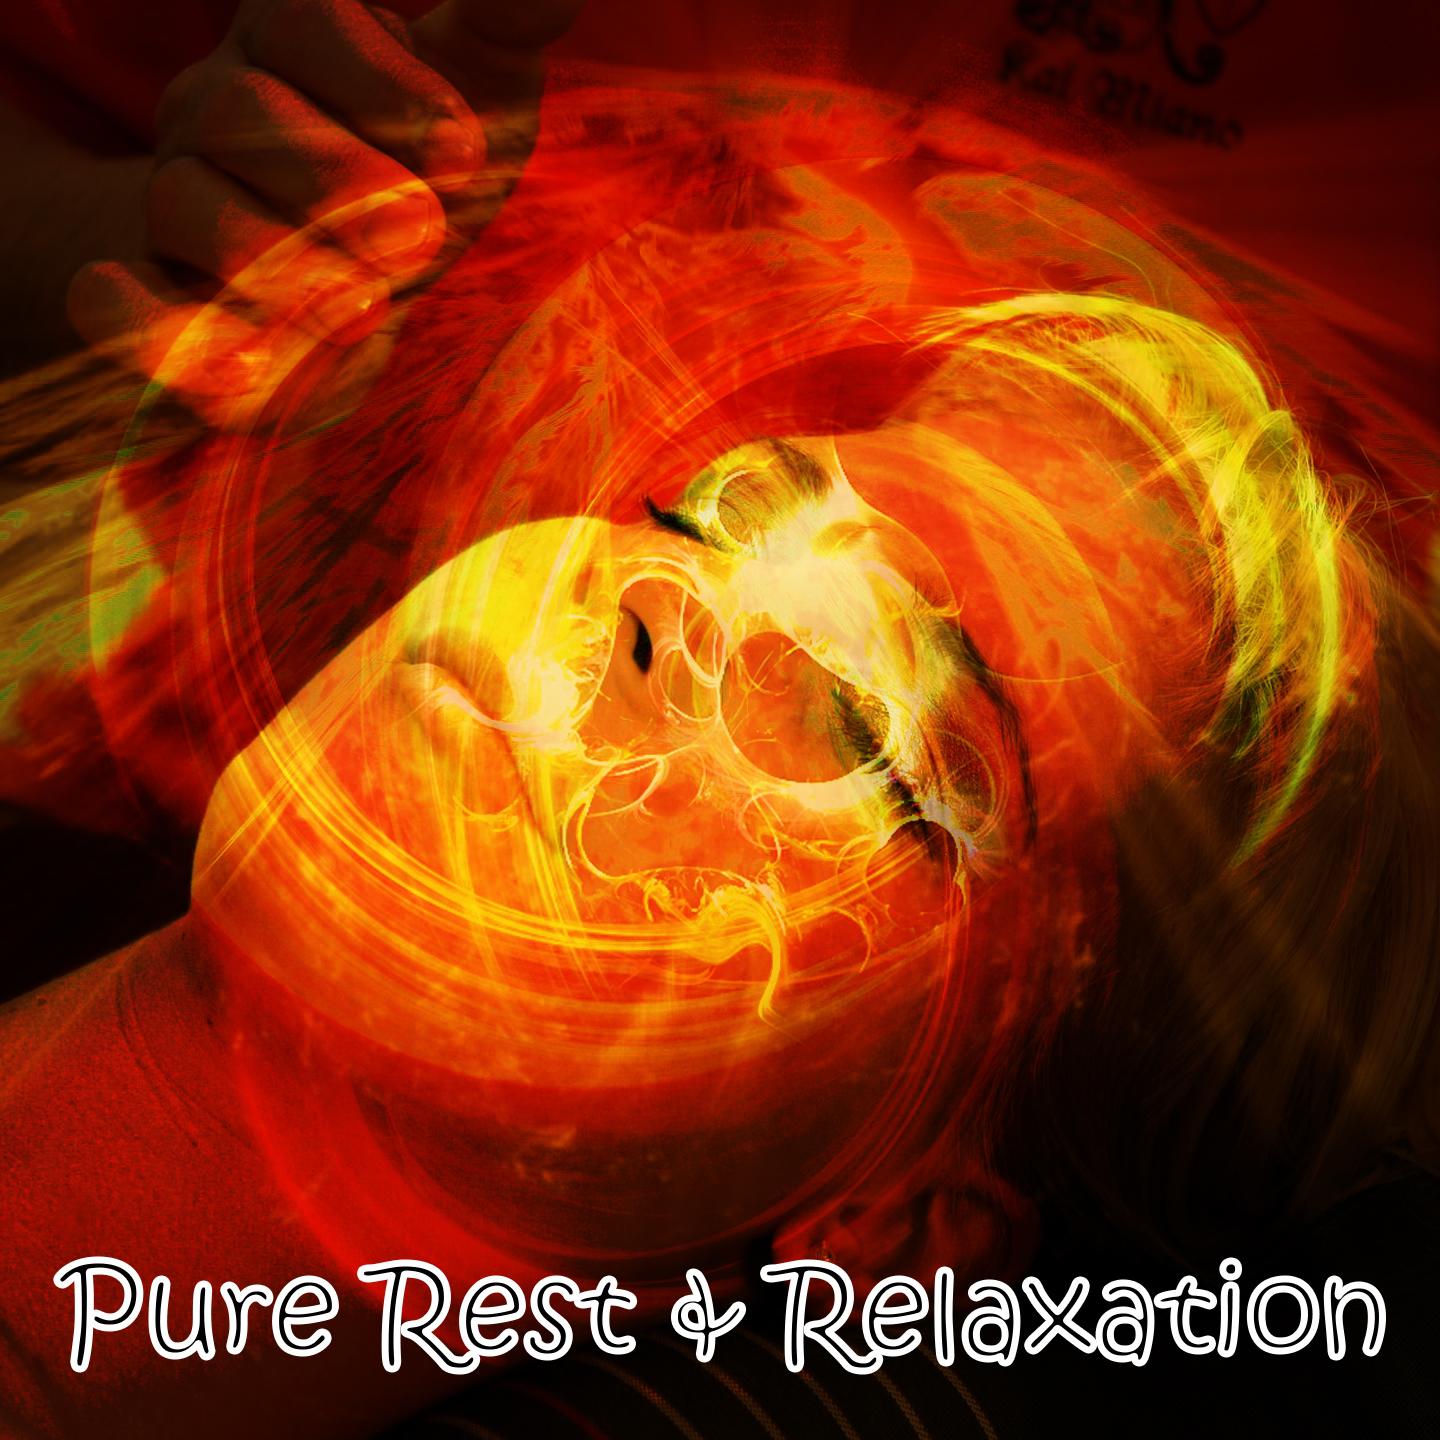 Pure Rest & Relaxation